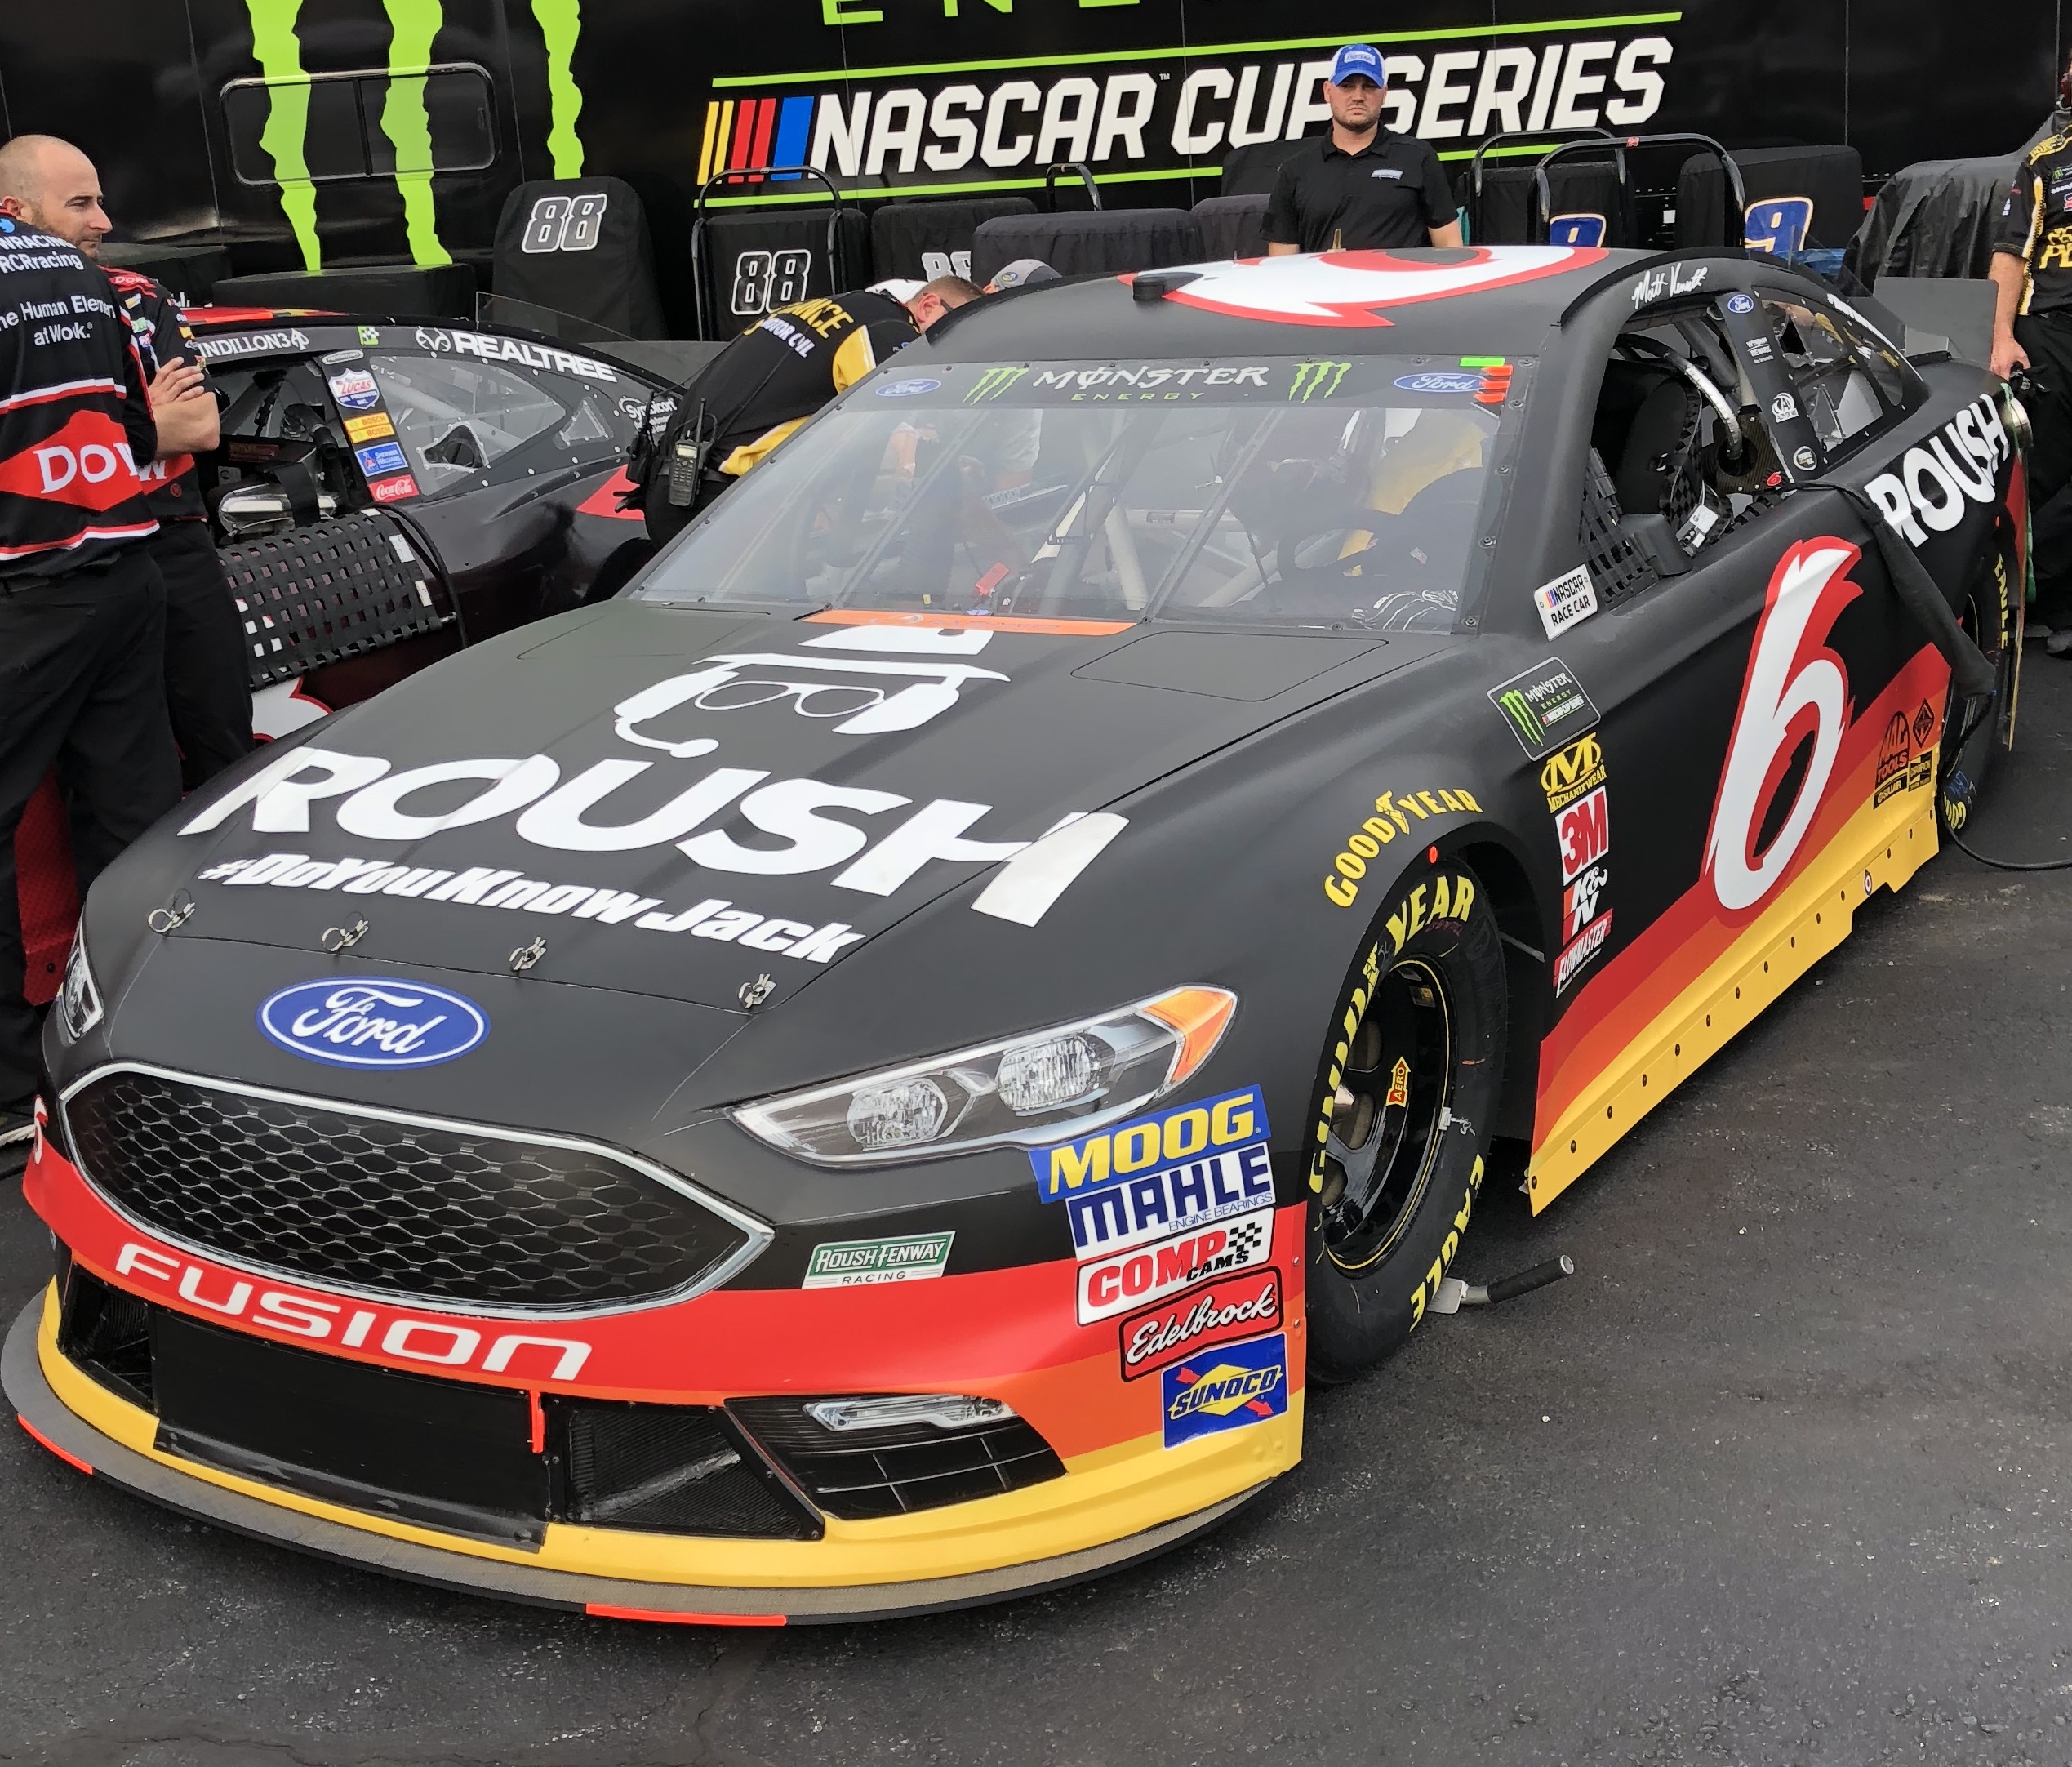 Can Roush Fenway Racing Make a Comeback in 2018?